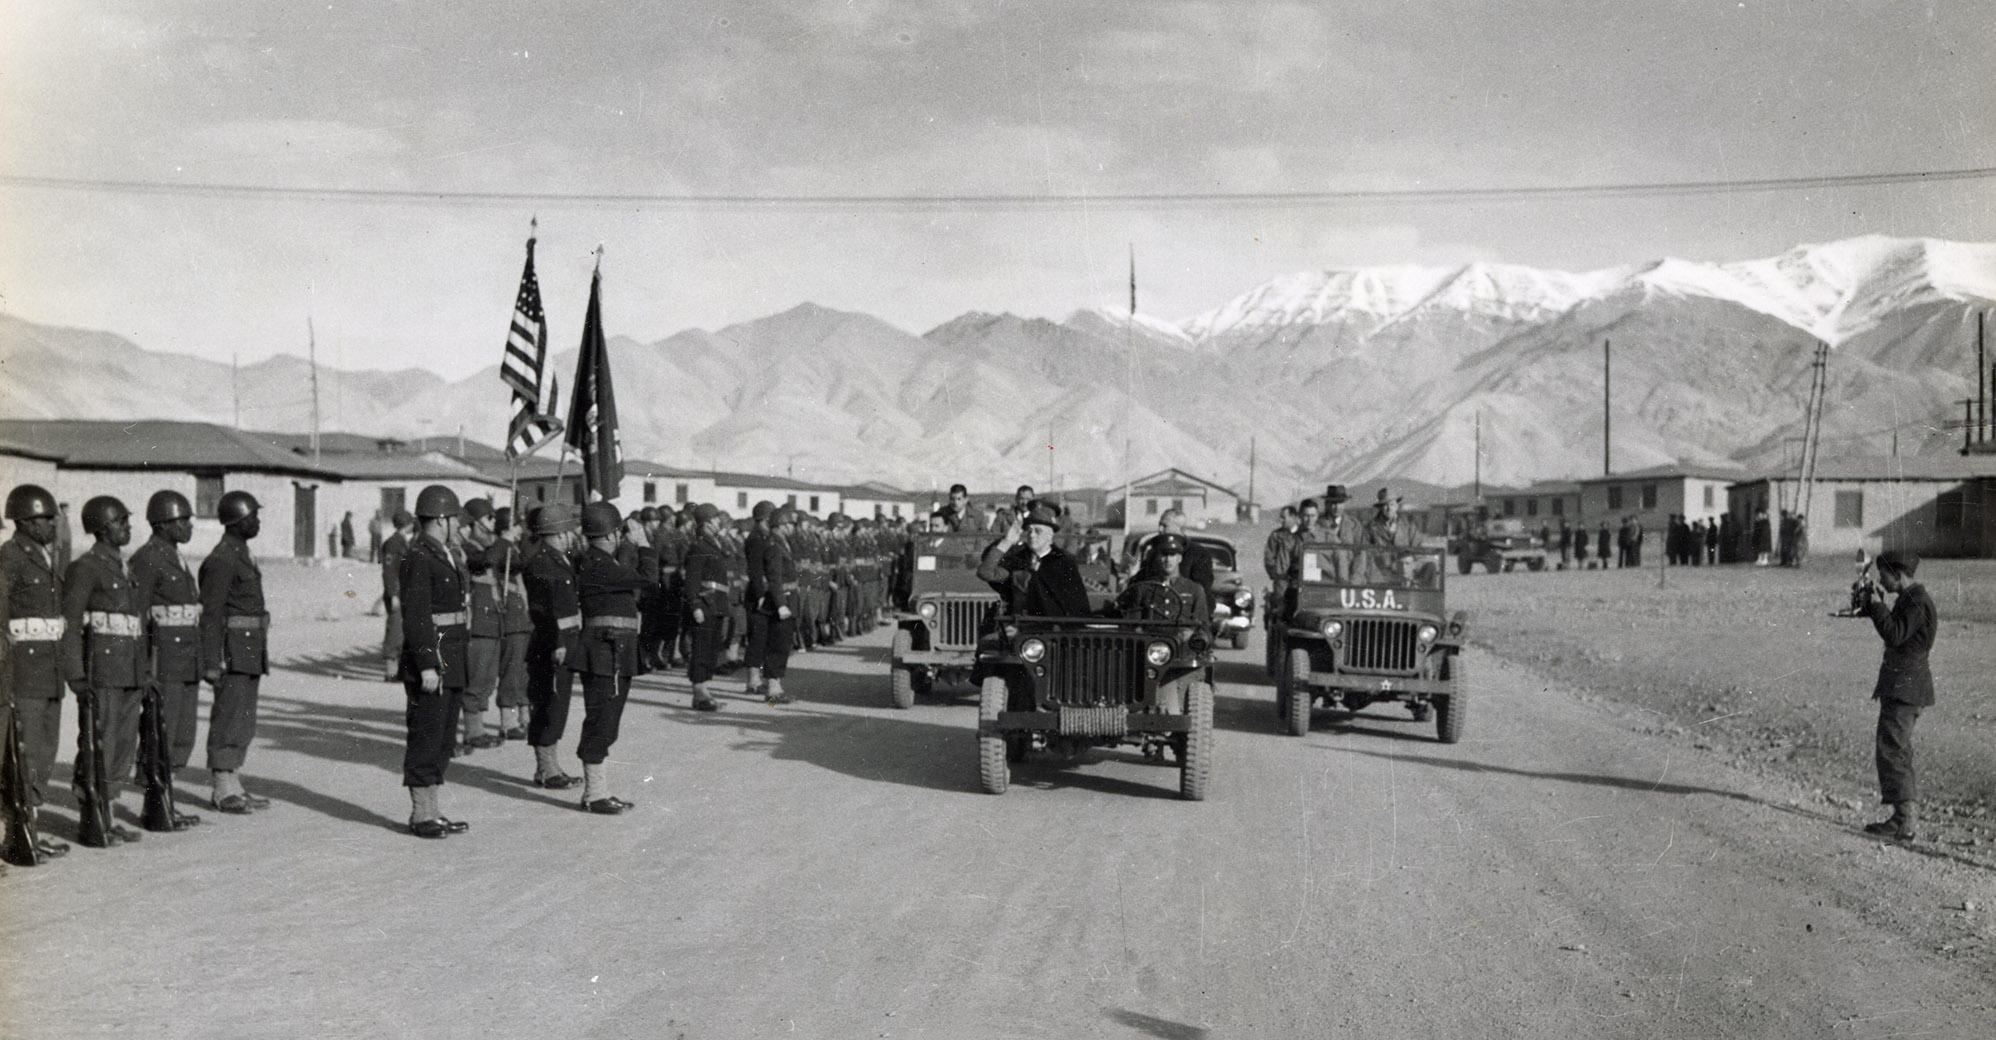 Roosevelt in a jeep passes by rows of soldiers at attention